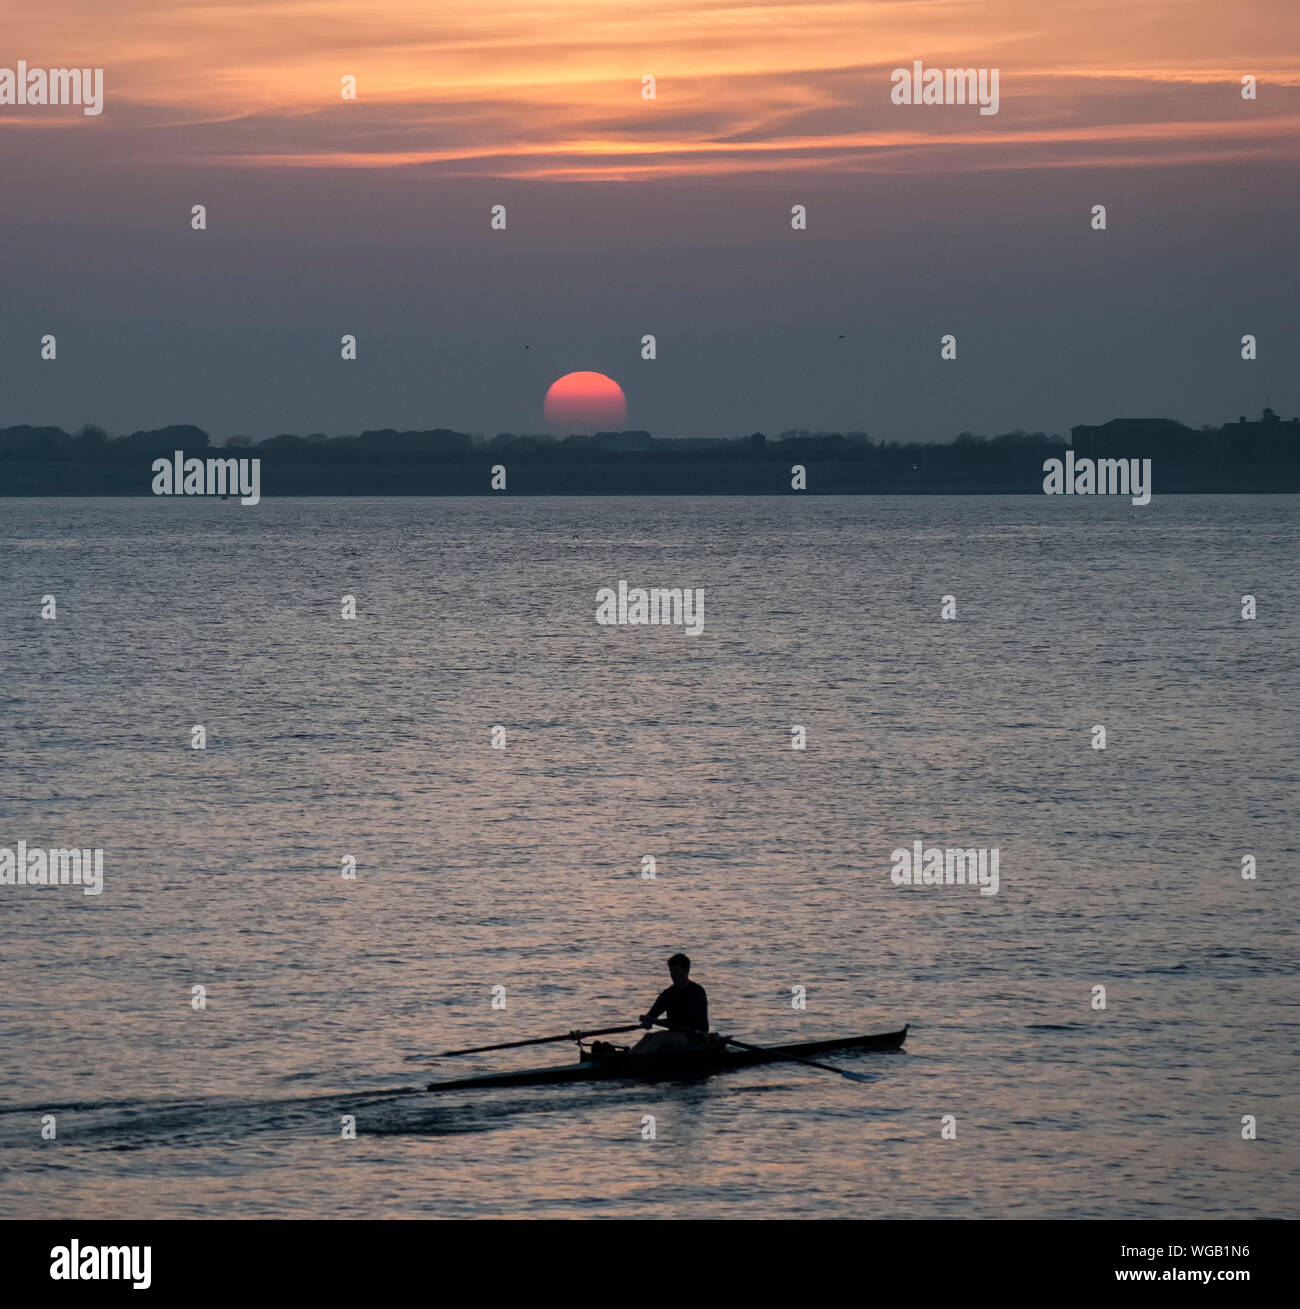 Silhouette Man Rowing Boat On Lake Against Sky During Sunset Stock Photo